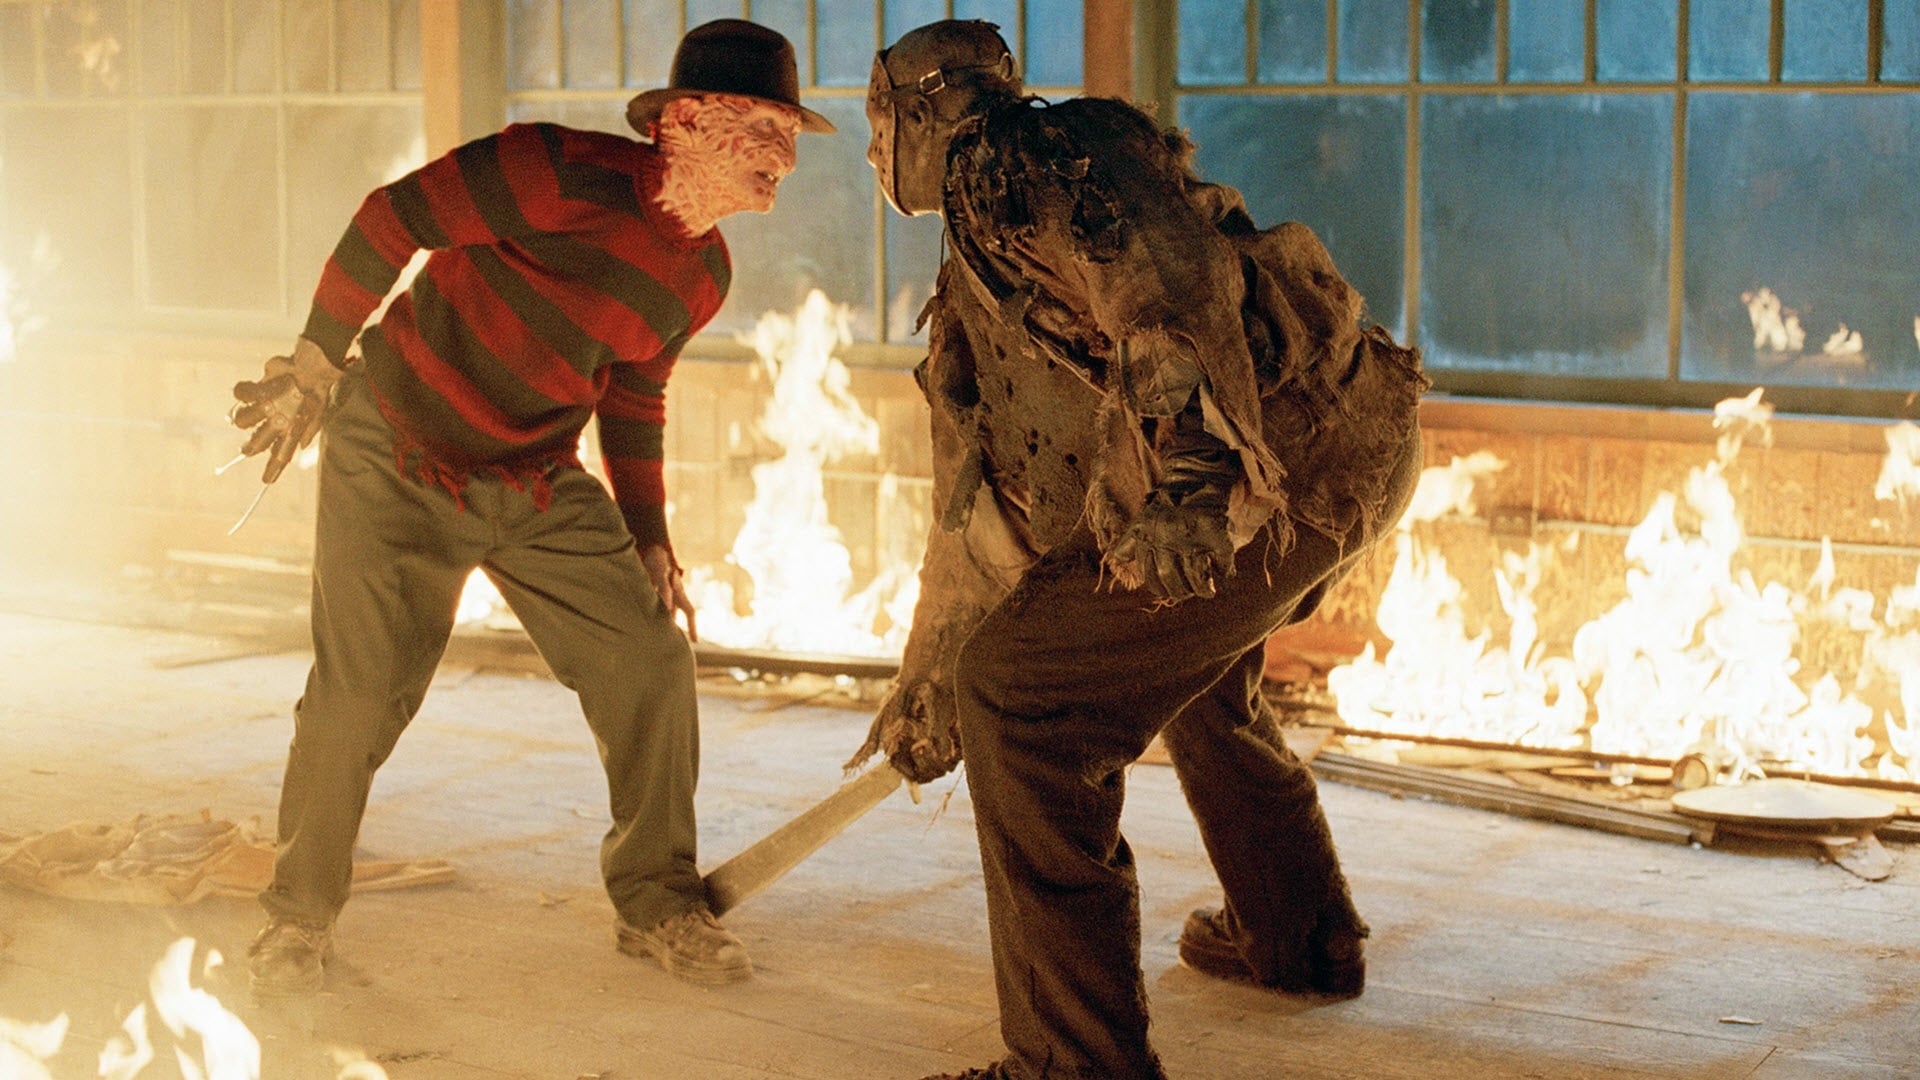 Screenshot from the film Freddy vs. Jason. Freddy Krueger and Jason Voorhees face off in a room surrounded by fire. 